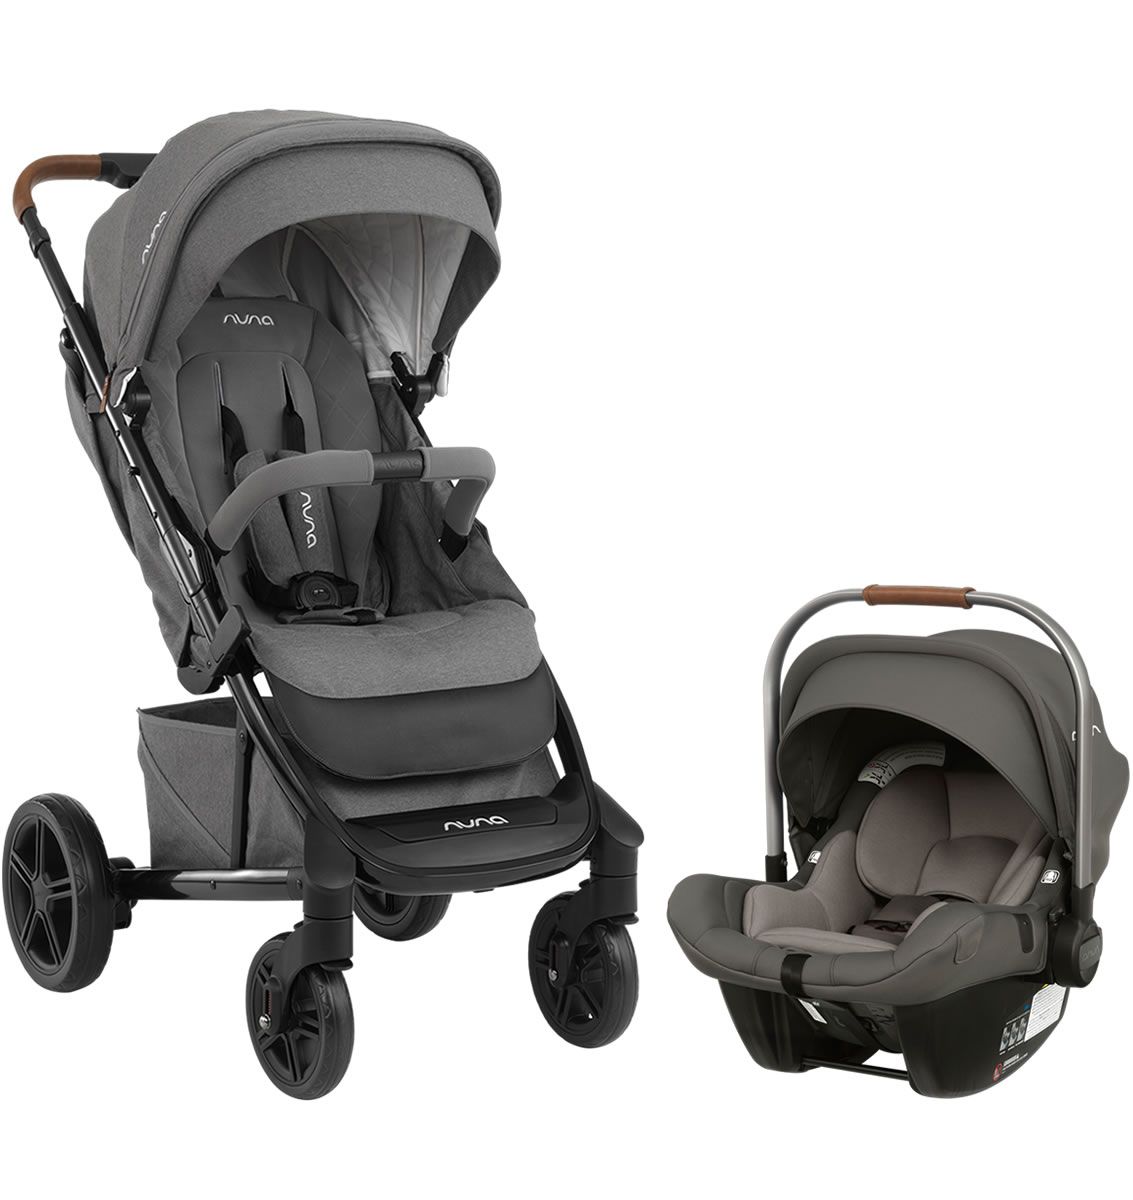 pushchairs for twins with car seats